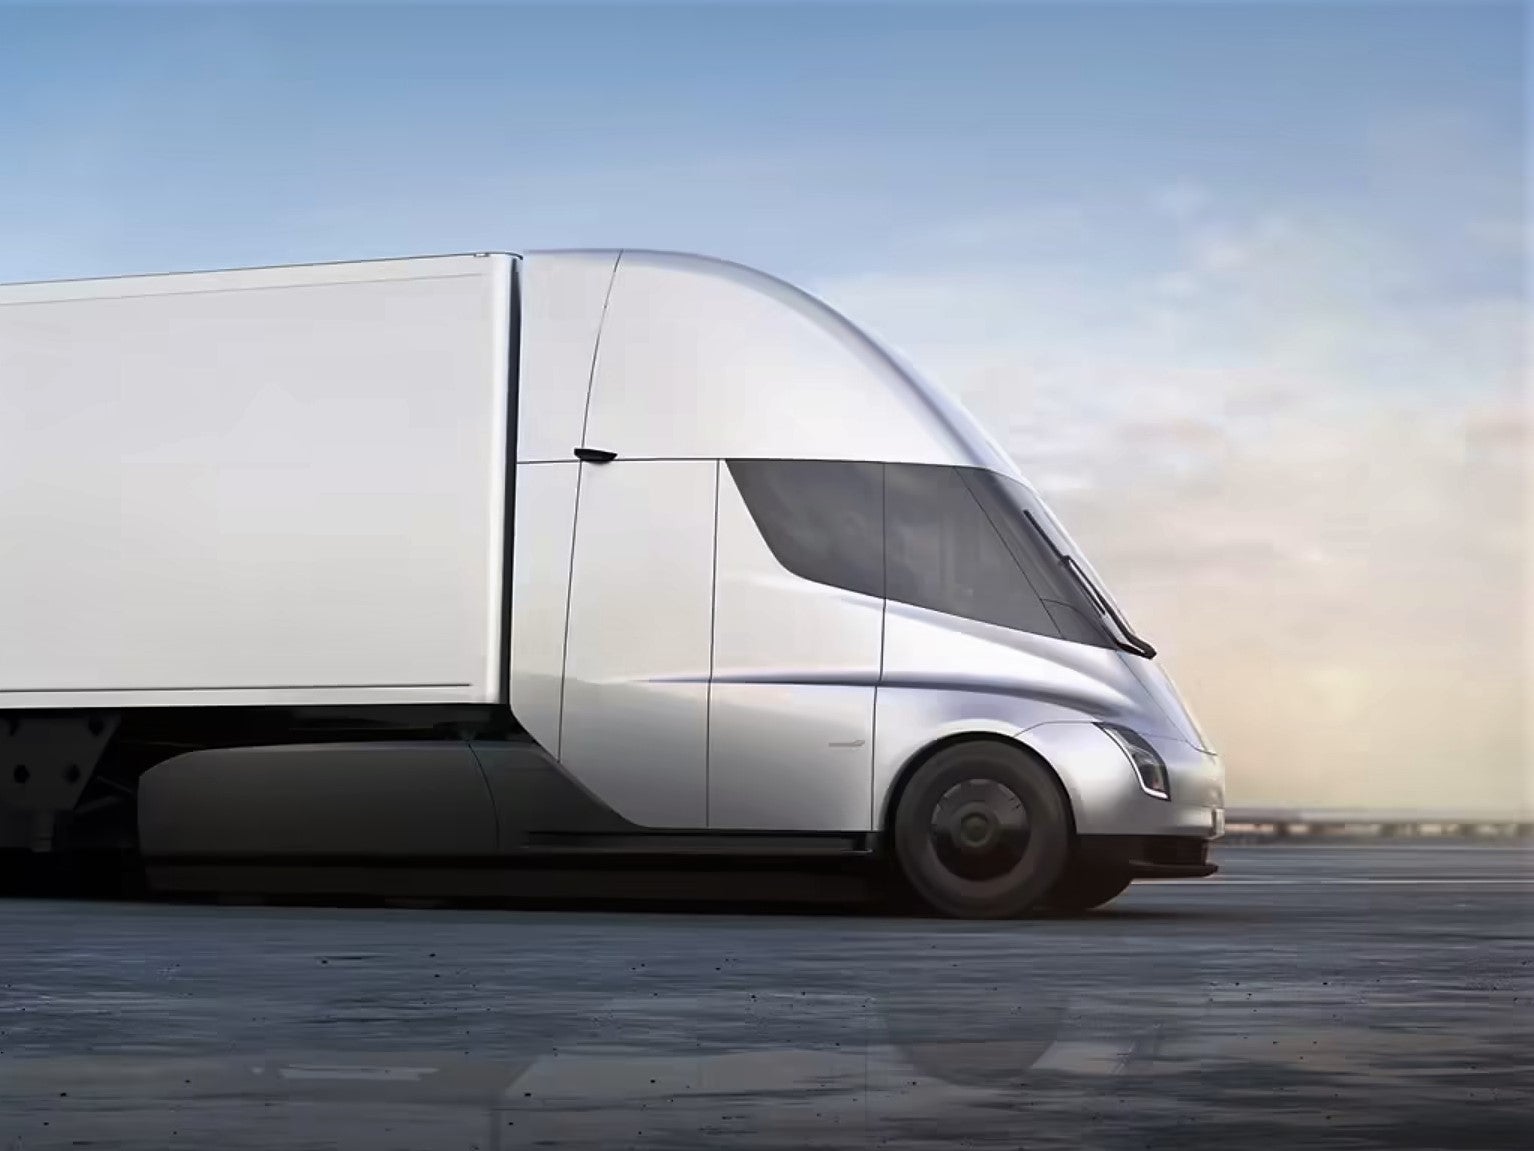 The Tesla Semi is one of a new generation of trucks with self-driving capabilities